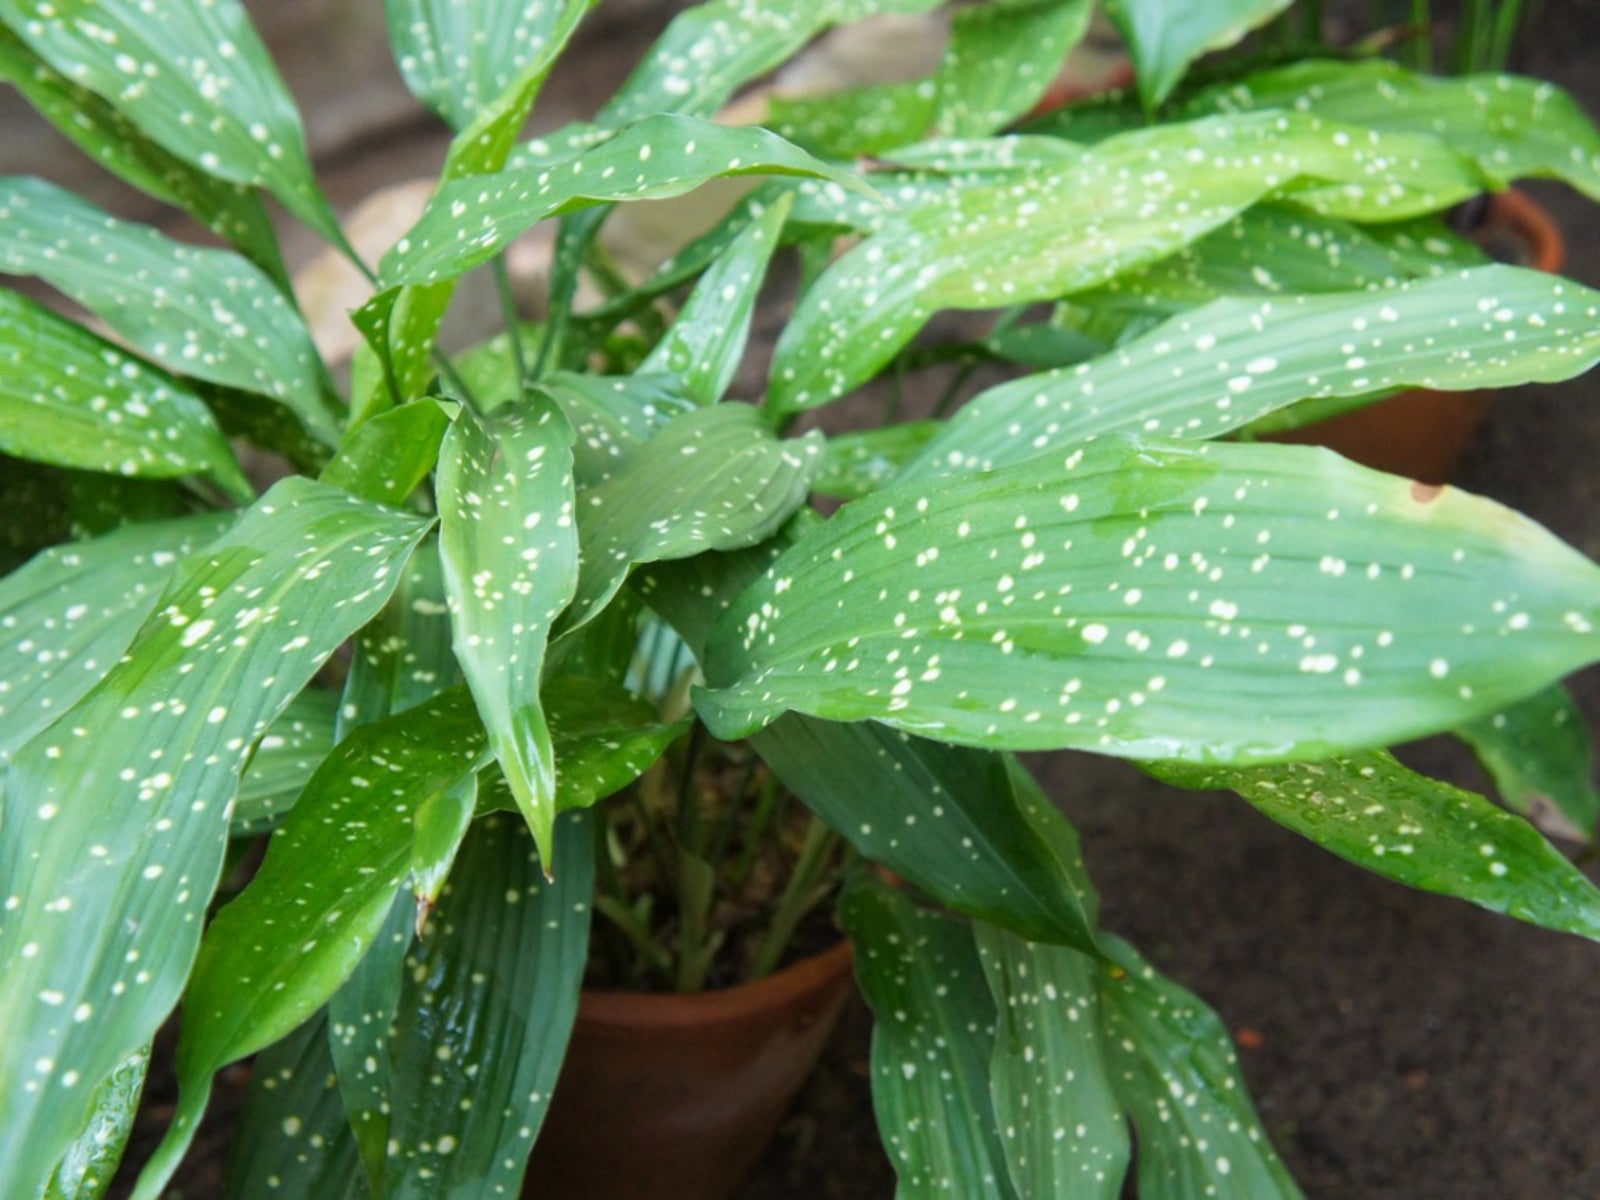 Cast Iron Plant Care   Tips For Growing Cast Iron Plants